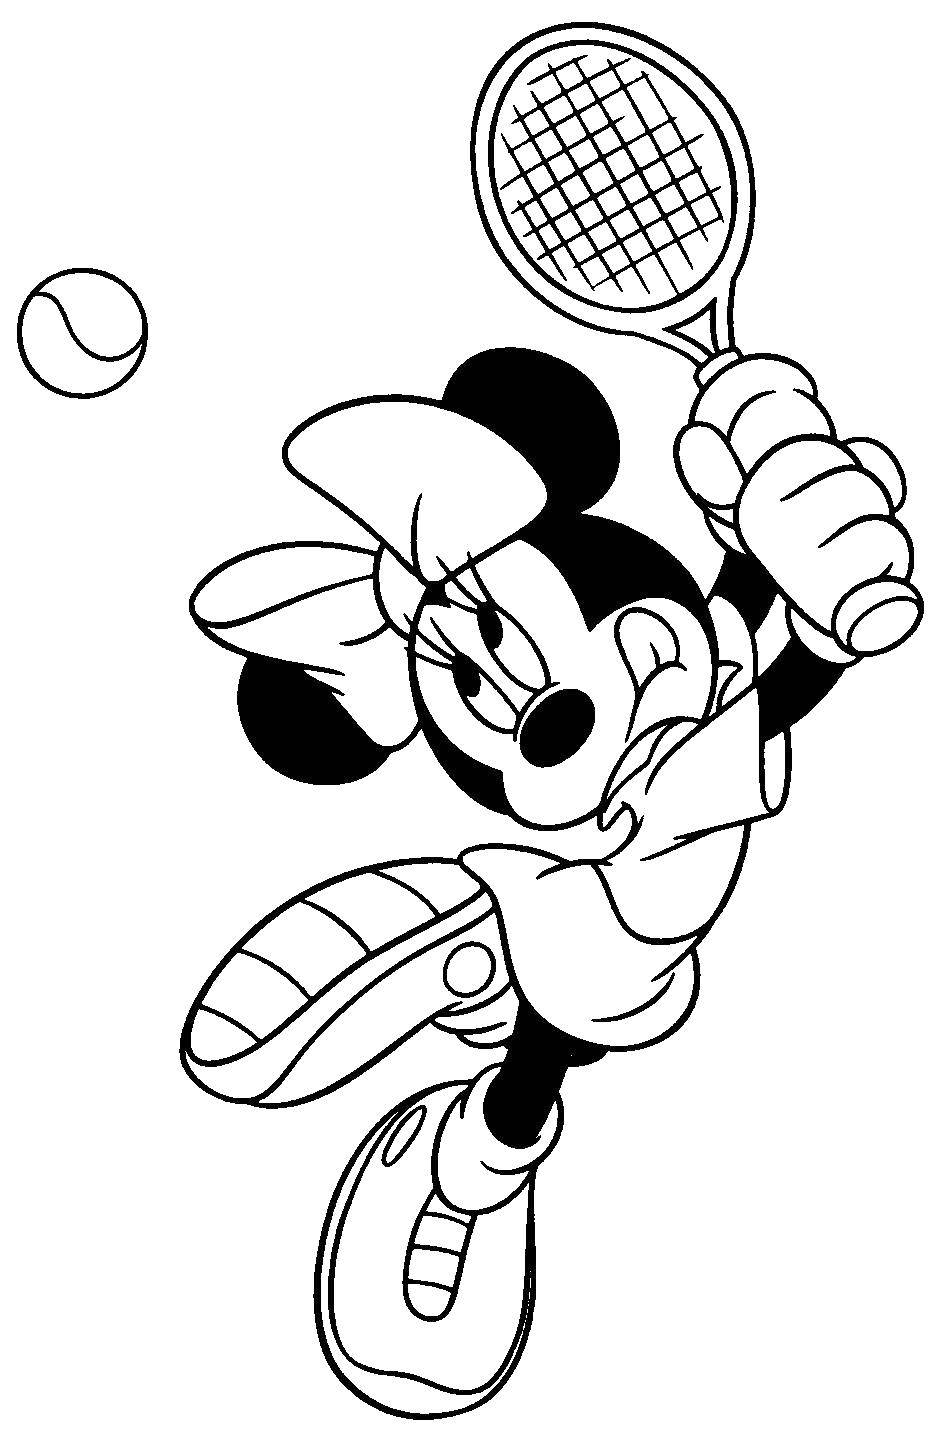 Coloring Minnie mouse playing tennis. Category Sports. Tags:  Sports, tennis, racquet.